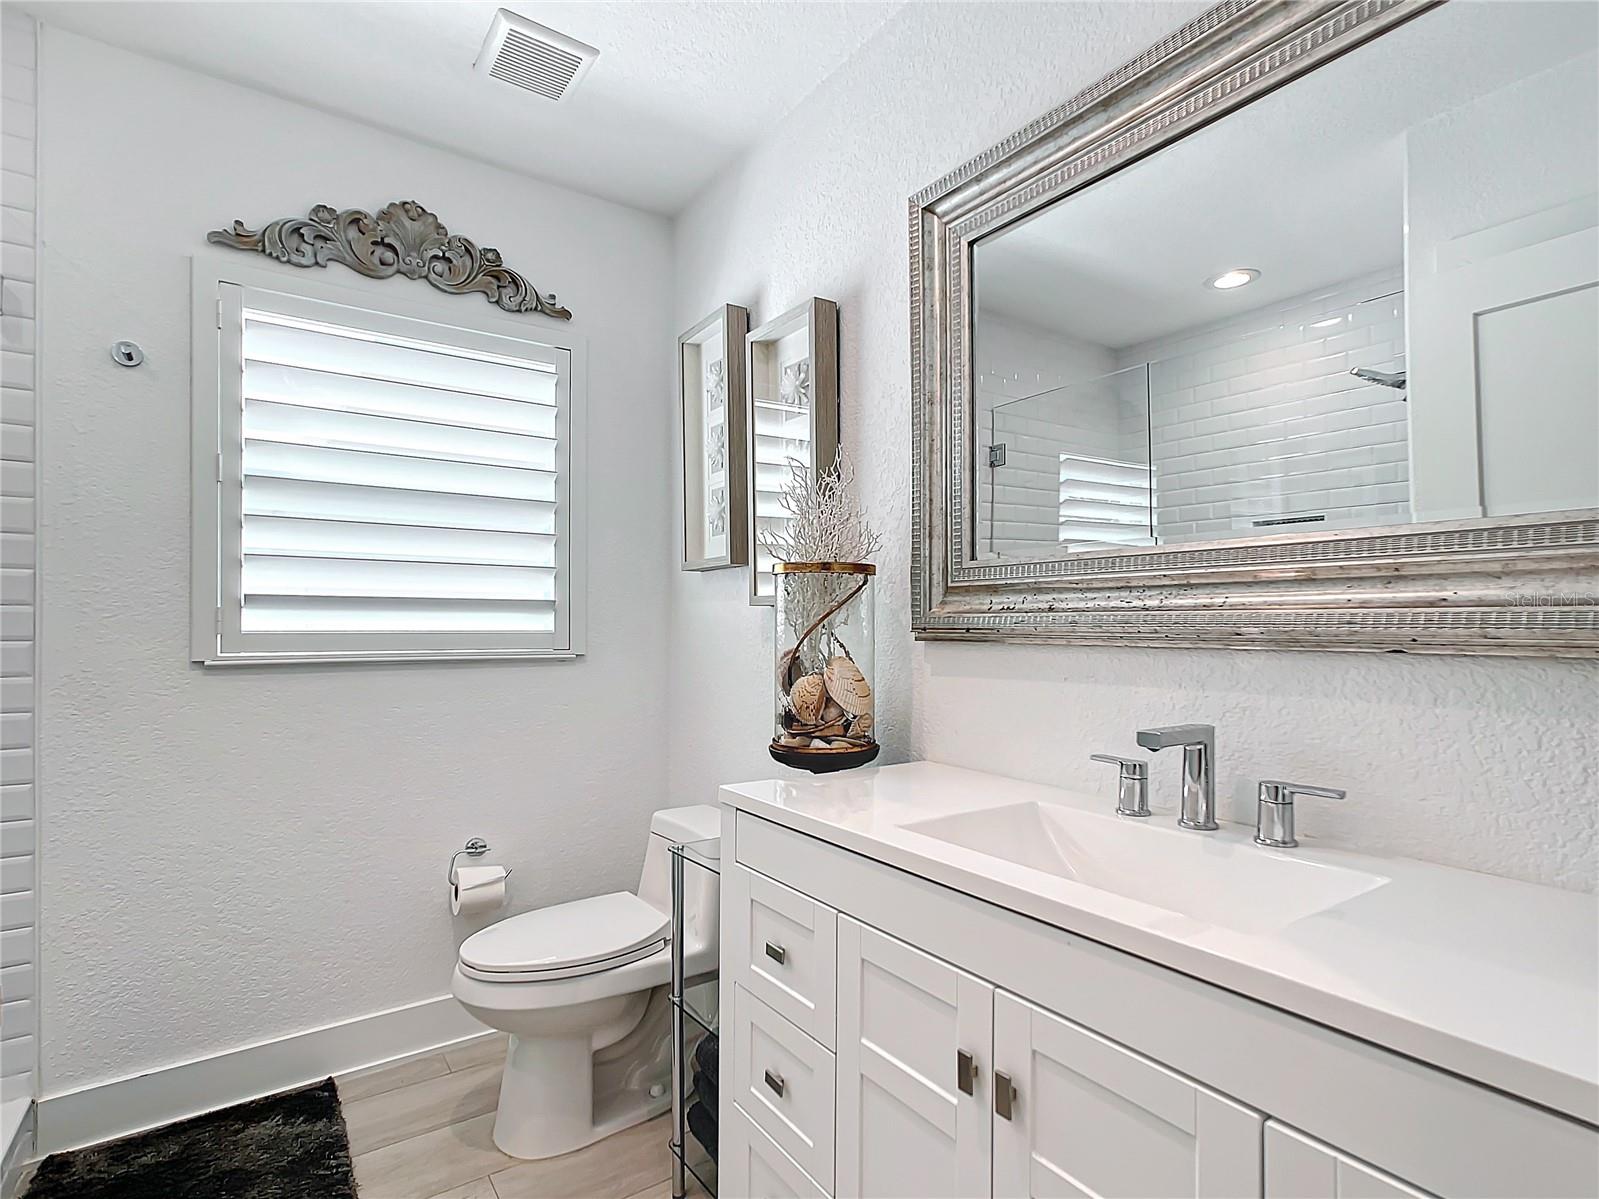 The 2nd bathroom, generous in size, boasts a bright white vanity with a solid surface countertop